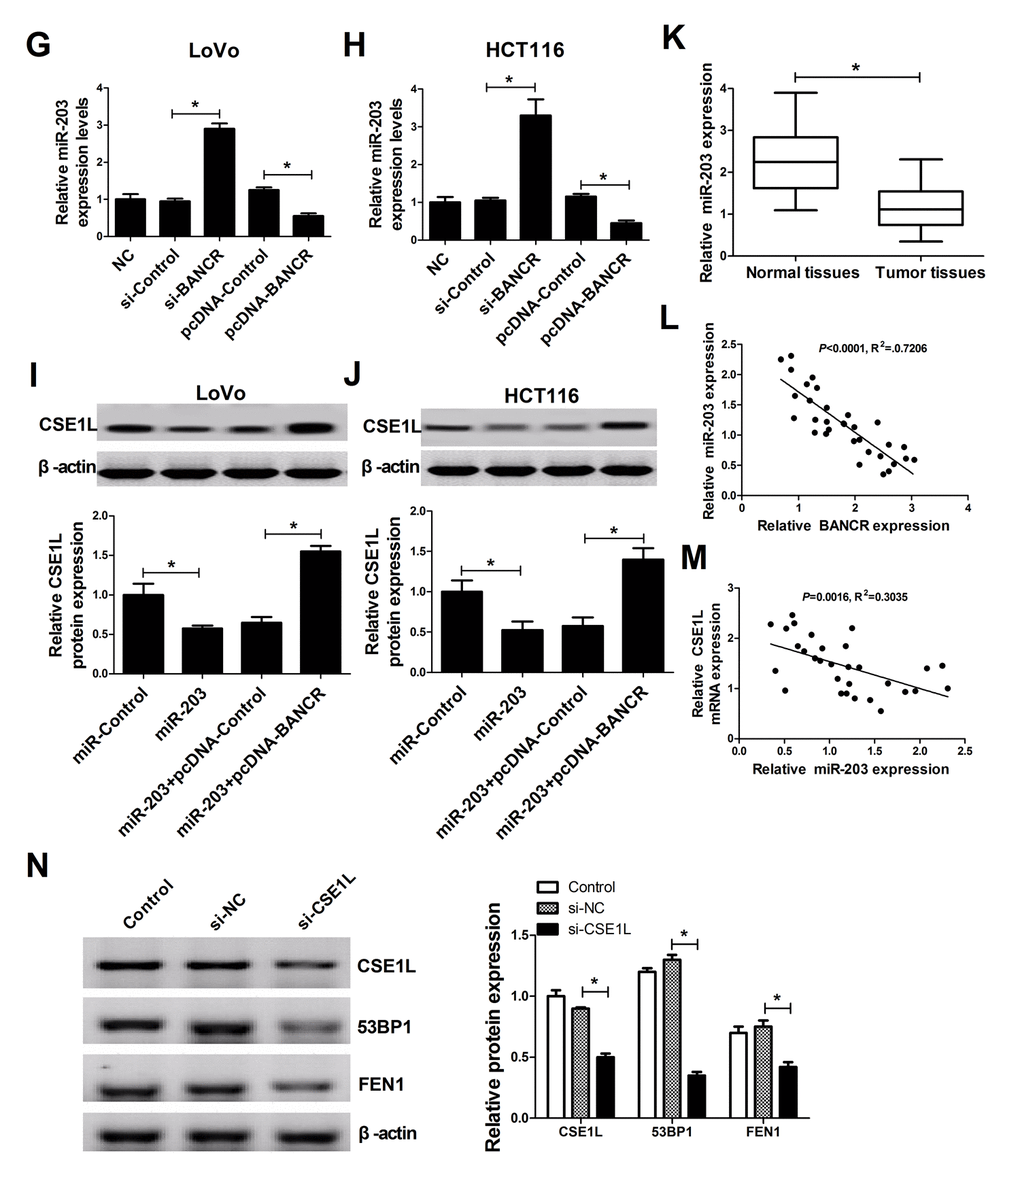 BANCR acted as a molecular sponge of miR-203 to sequester miR-203 away from CSE1L in CRC cells. (G and H) The effects of BANCR knockdown and overexpression on miR-203 expression were assessed in LoVo and HCT116 cells. (I and J) LoVo and HCT116 cells were transfected with miR-Control, miR-203, miR-203+pcDNA-Control, or miR-203+pcDNA-BANCR, followed by the measurement of CSE1L protein level. (K) miR-203 expression in 32 paired CRC tumor tissues and adjacent non-cancerous tissues. (L and M) Correlation analysis between miR-203 and BANCR or CSE1L in 32 paired CRC tumor tissues. (N) The effects of CSE1L silencing on 53BP1 and FEN1 expressions were tested in HCT116 cells. *P 